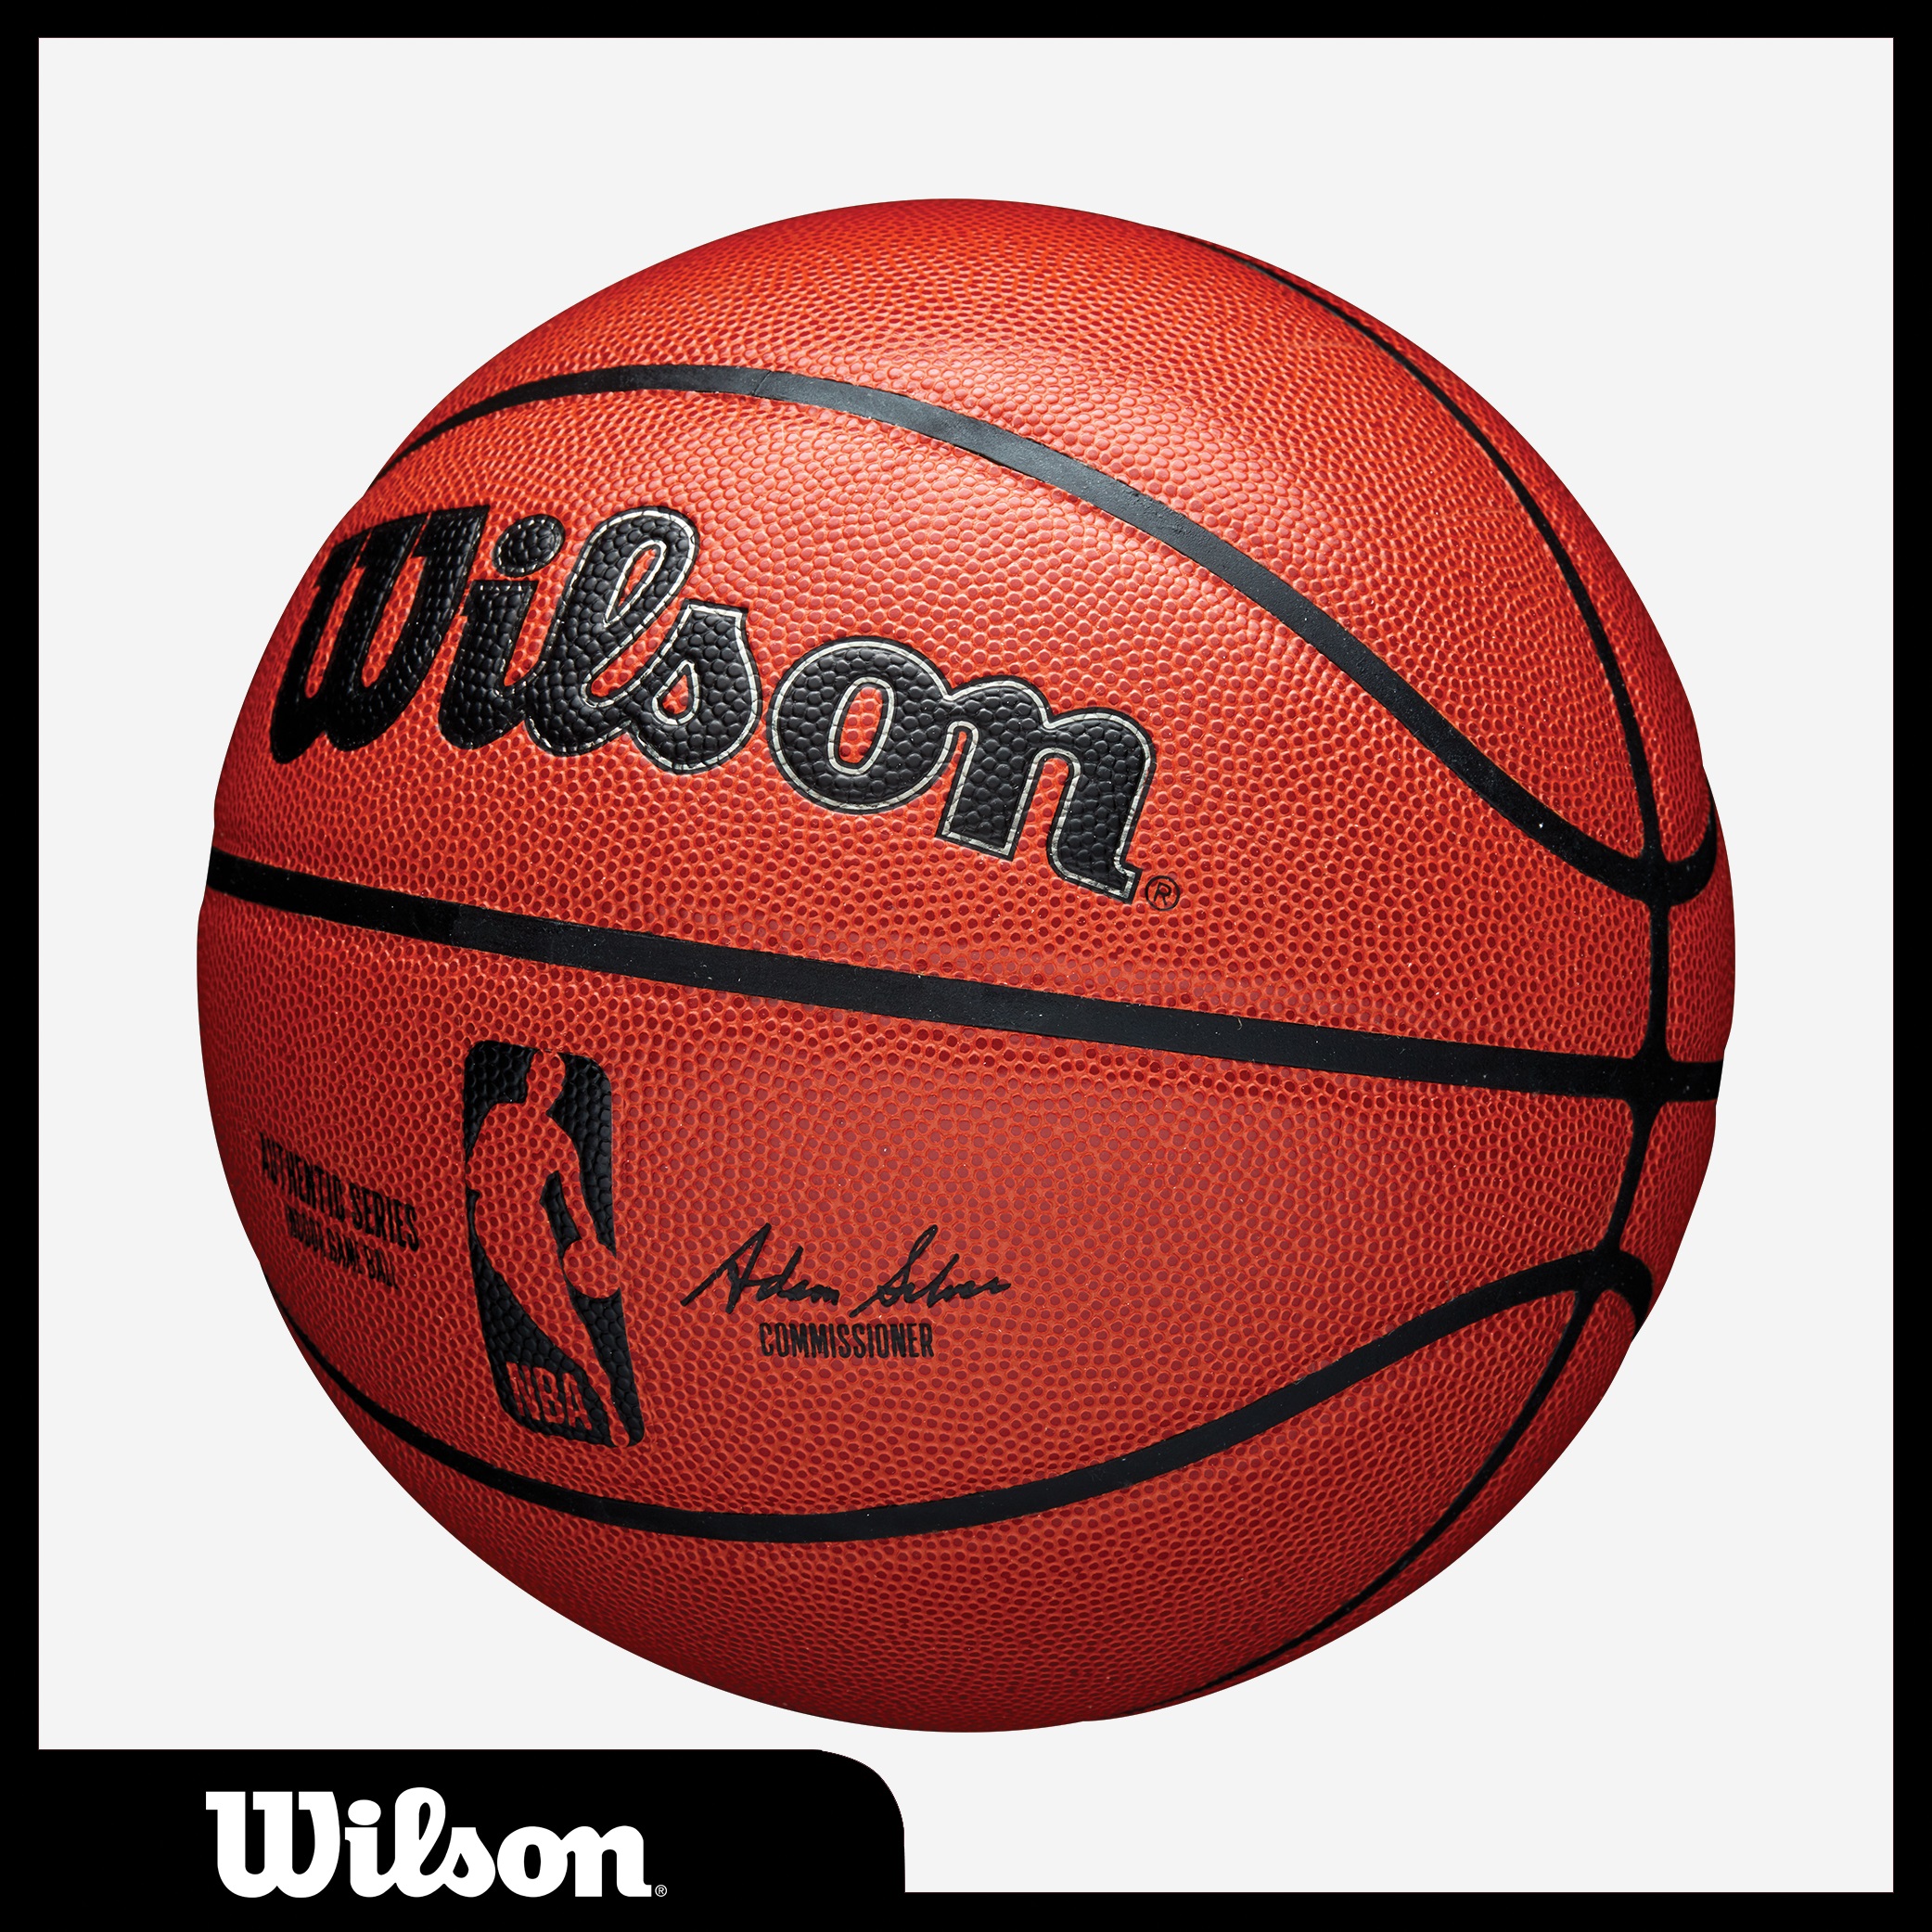 NBA Authentic Indoor Competition Basketball